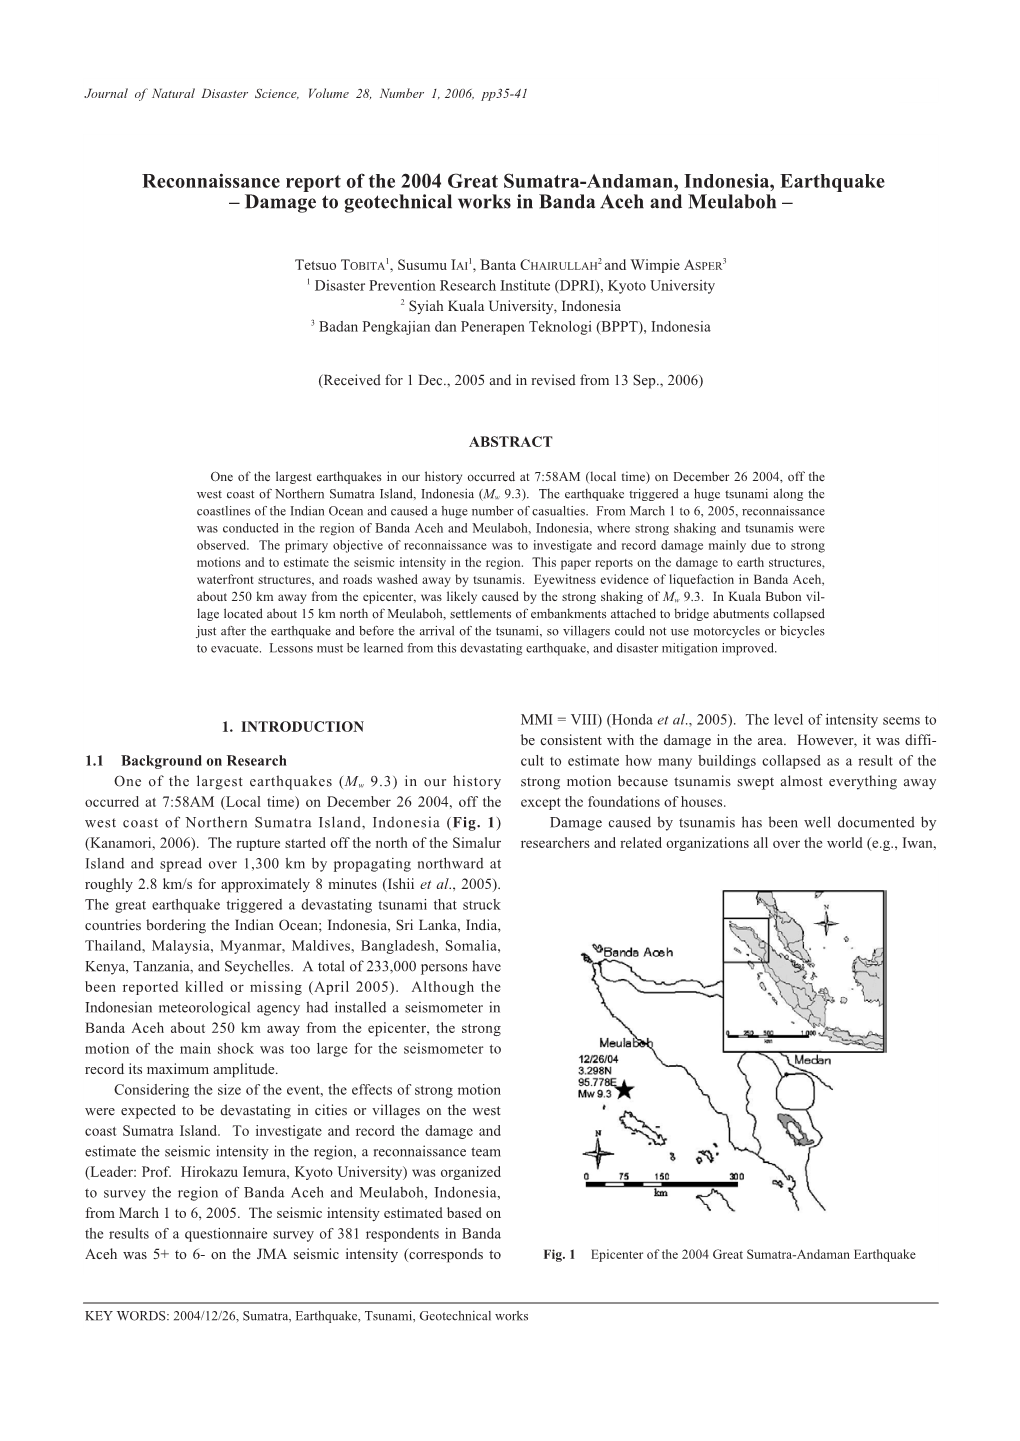 Reconnaissance Report of the 2004 Great Sumatra-Andaman, Indonesia, Earthquake – Damage to Geotechnical Works in Banda Aceh An